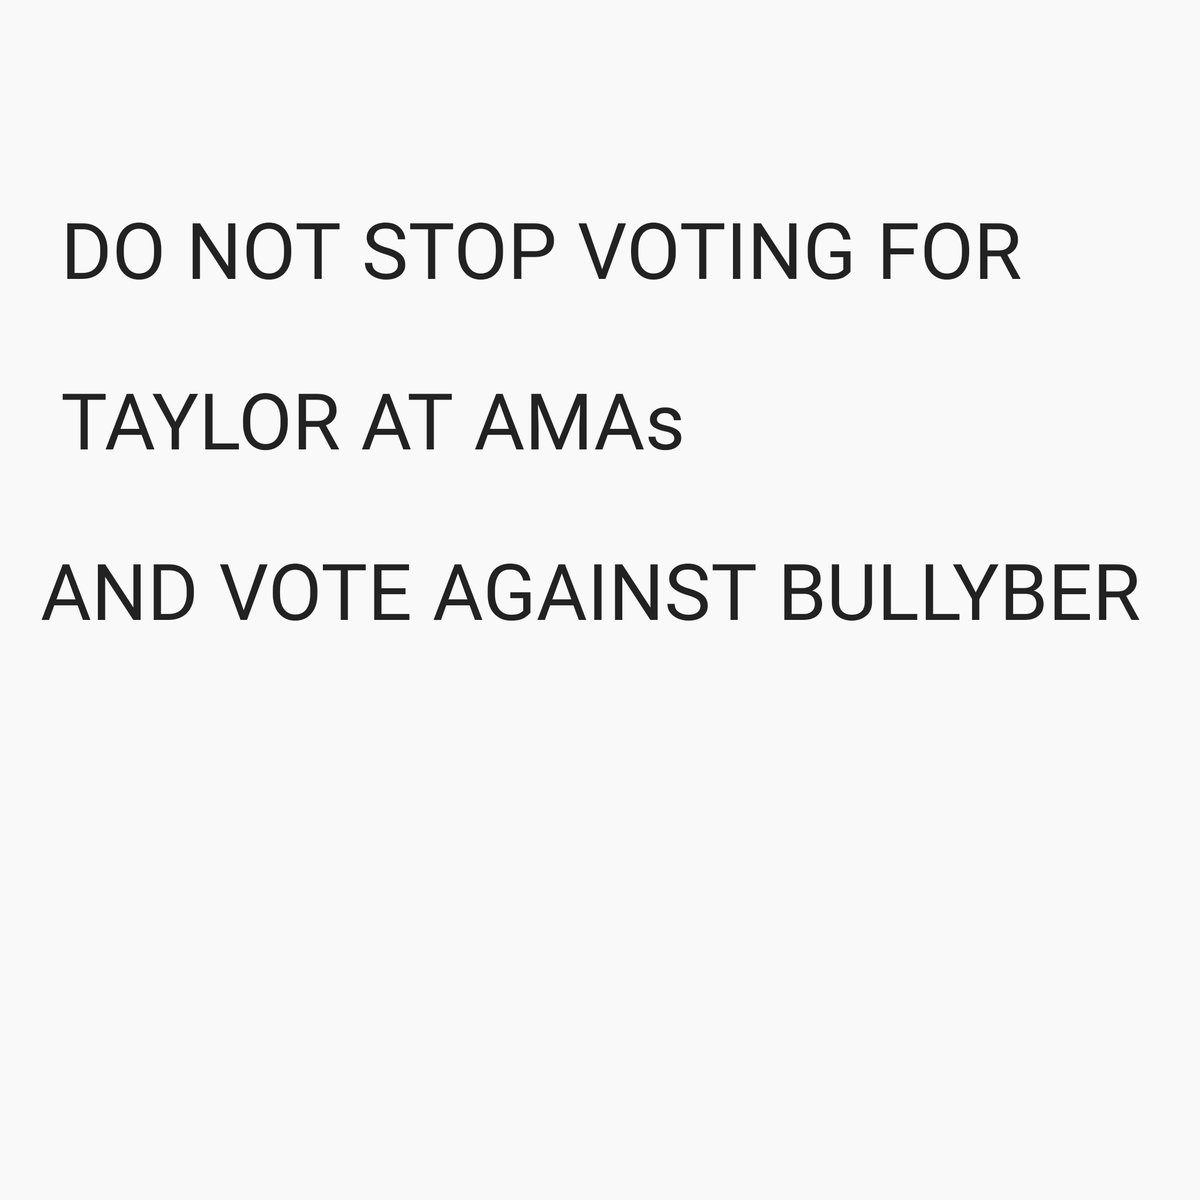 Some suggestions to save your fan account and still promote taylors music .Most importantly keep voting for Taylor She said it herself we are the reason why industry cares about her Keep voting people !!